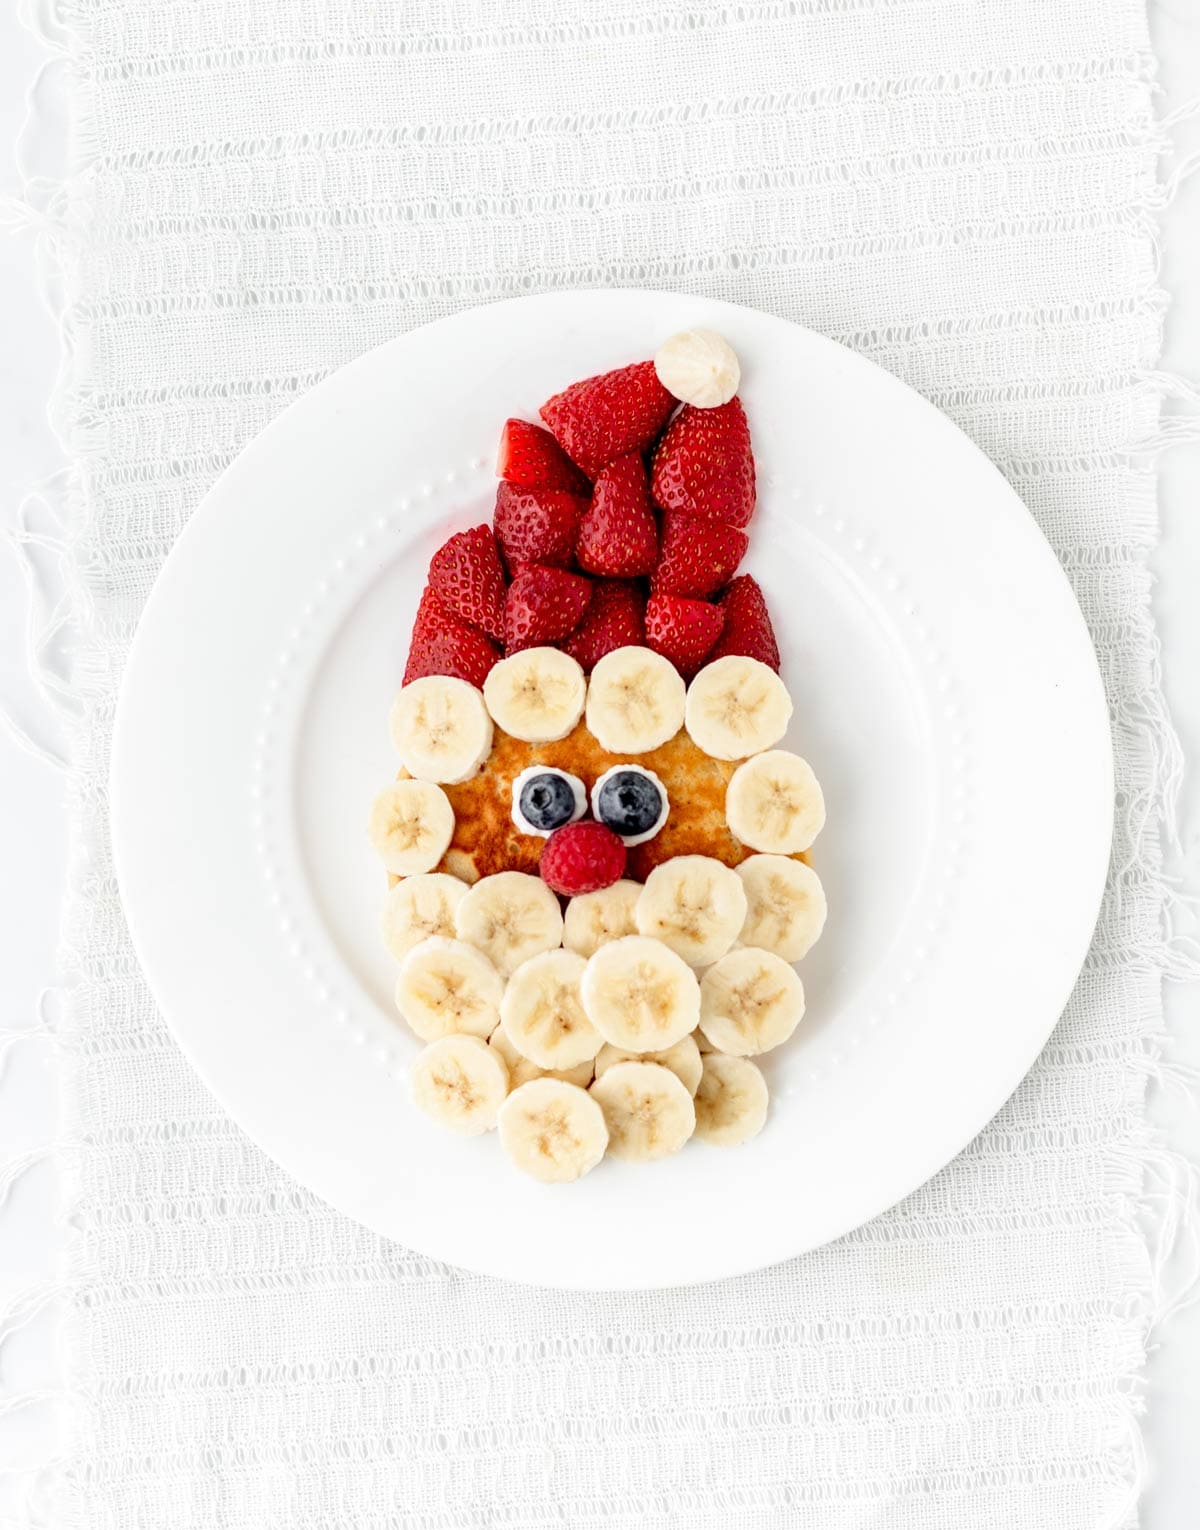 A Santa face pancake with strawberries, bananas, blueberries and raspberries.